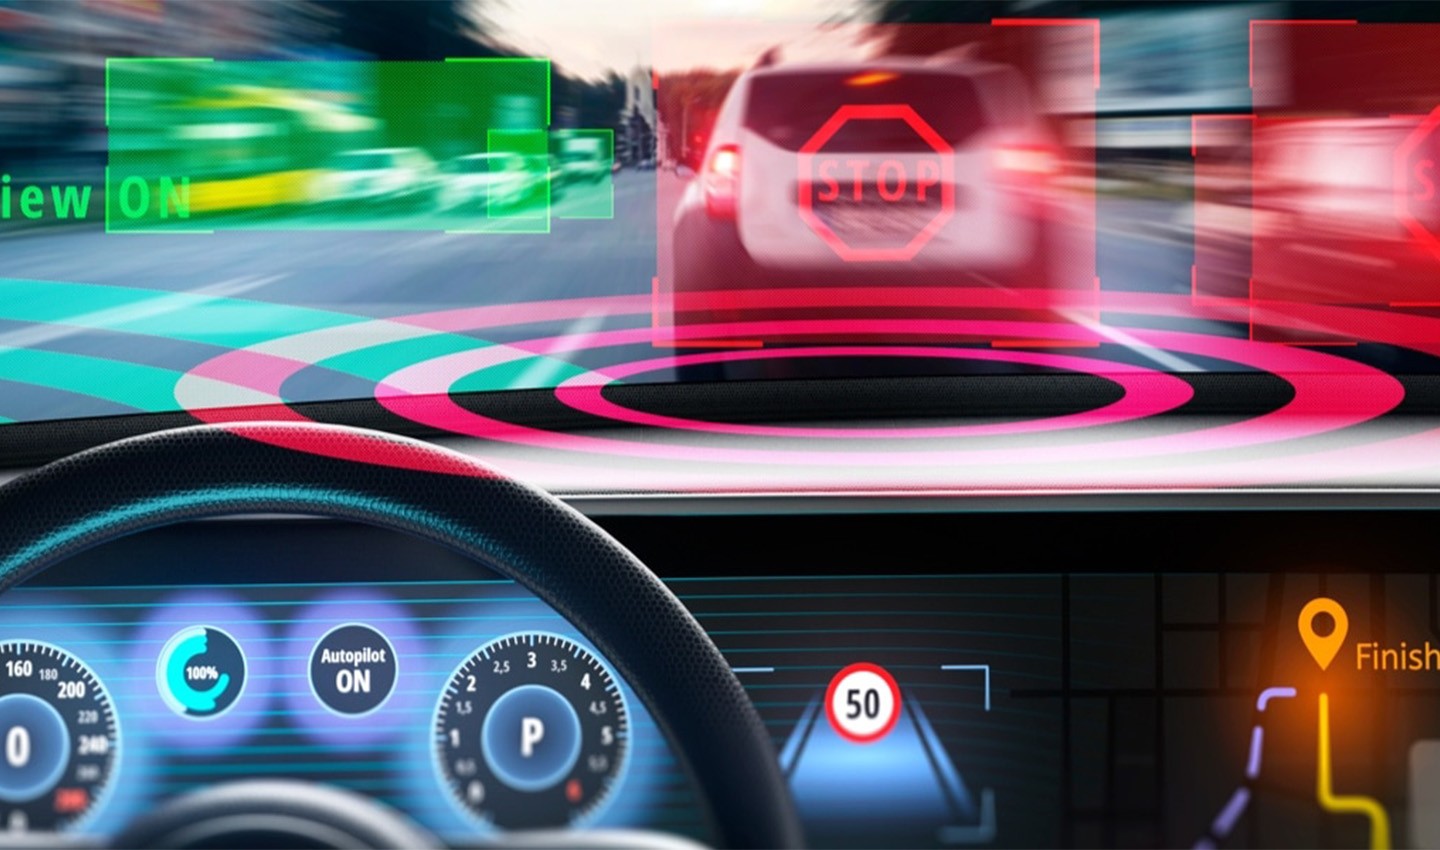 In-vehicle dashboard with ADAS alerts and driver assistance warnings